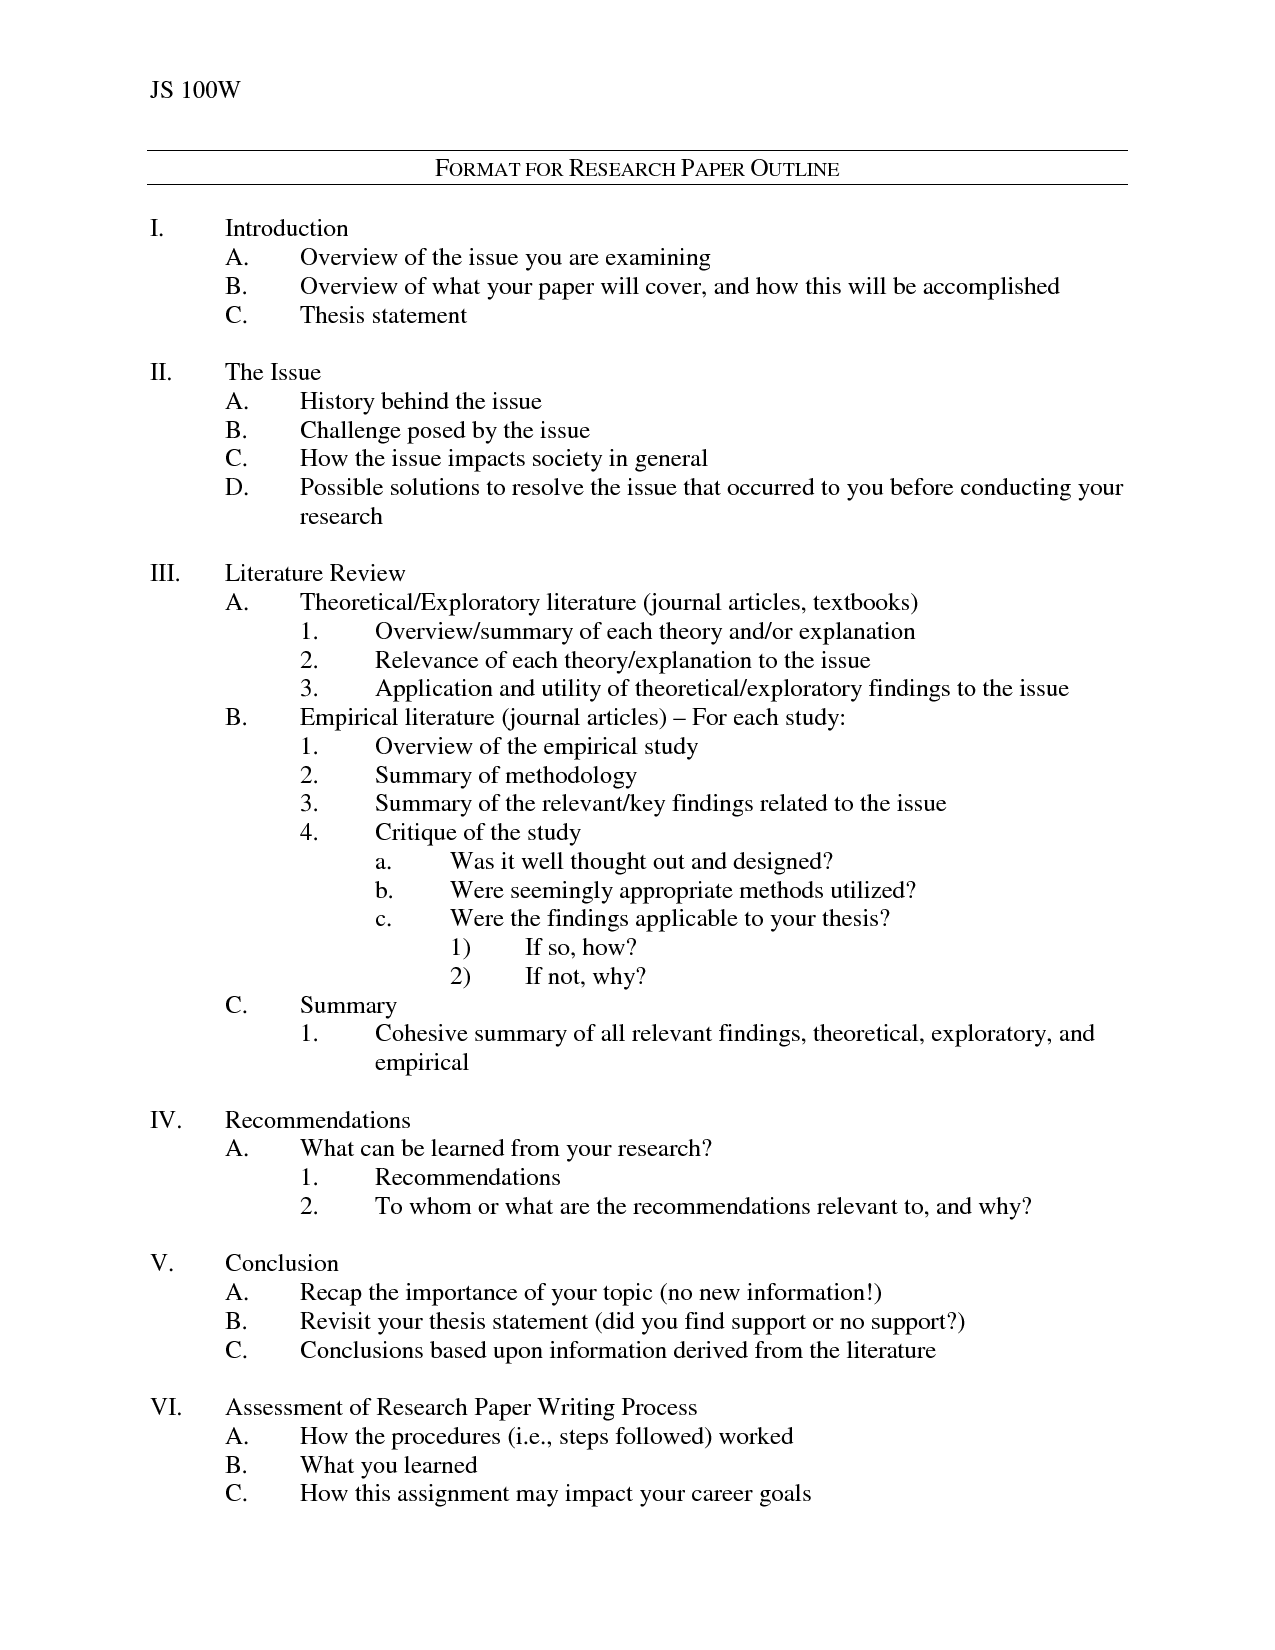 Research Paper Outline Format Example